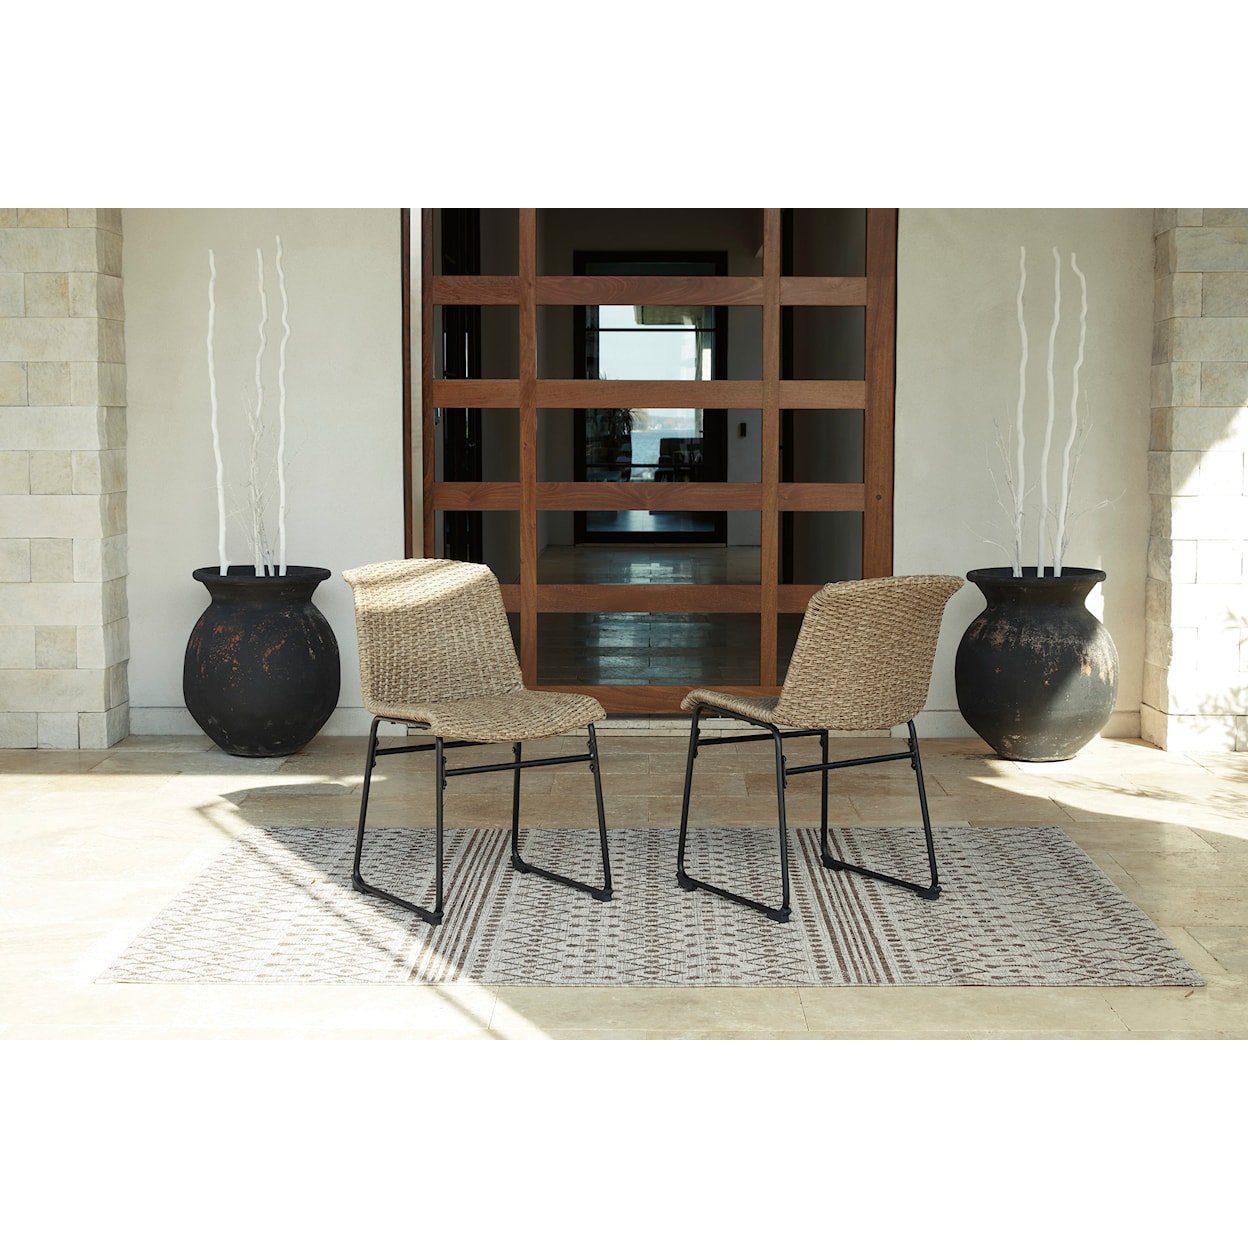 Signature Design by Ashley Amaris Set of 2 Outdoor Dining Chairs